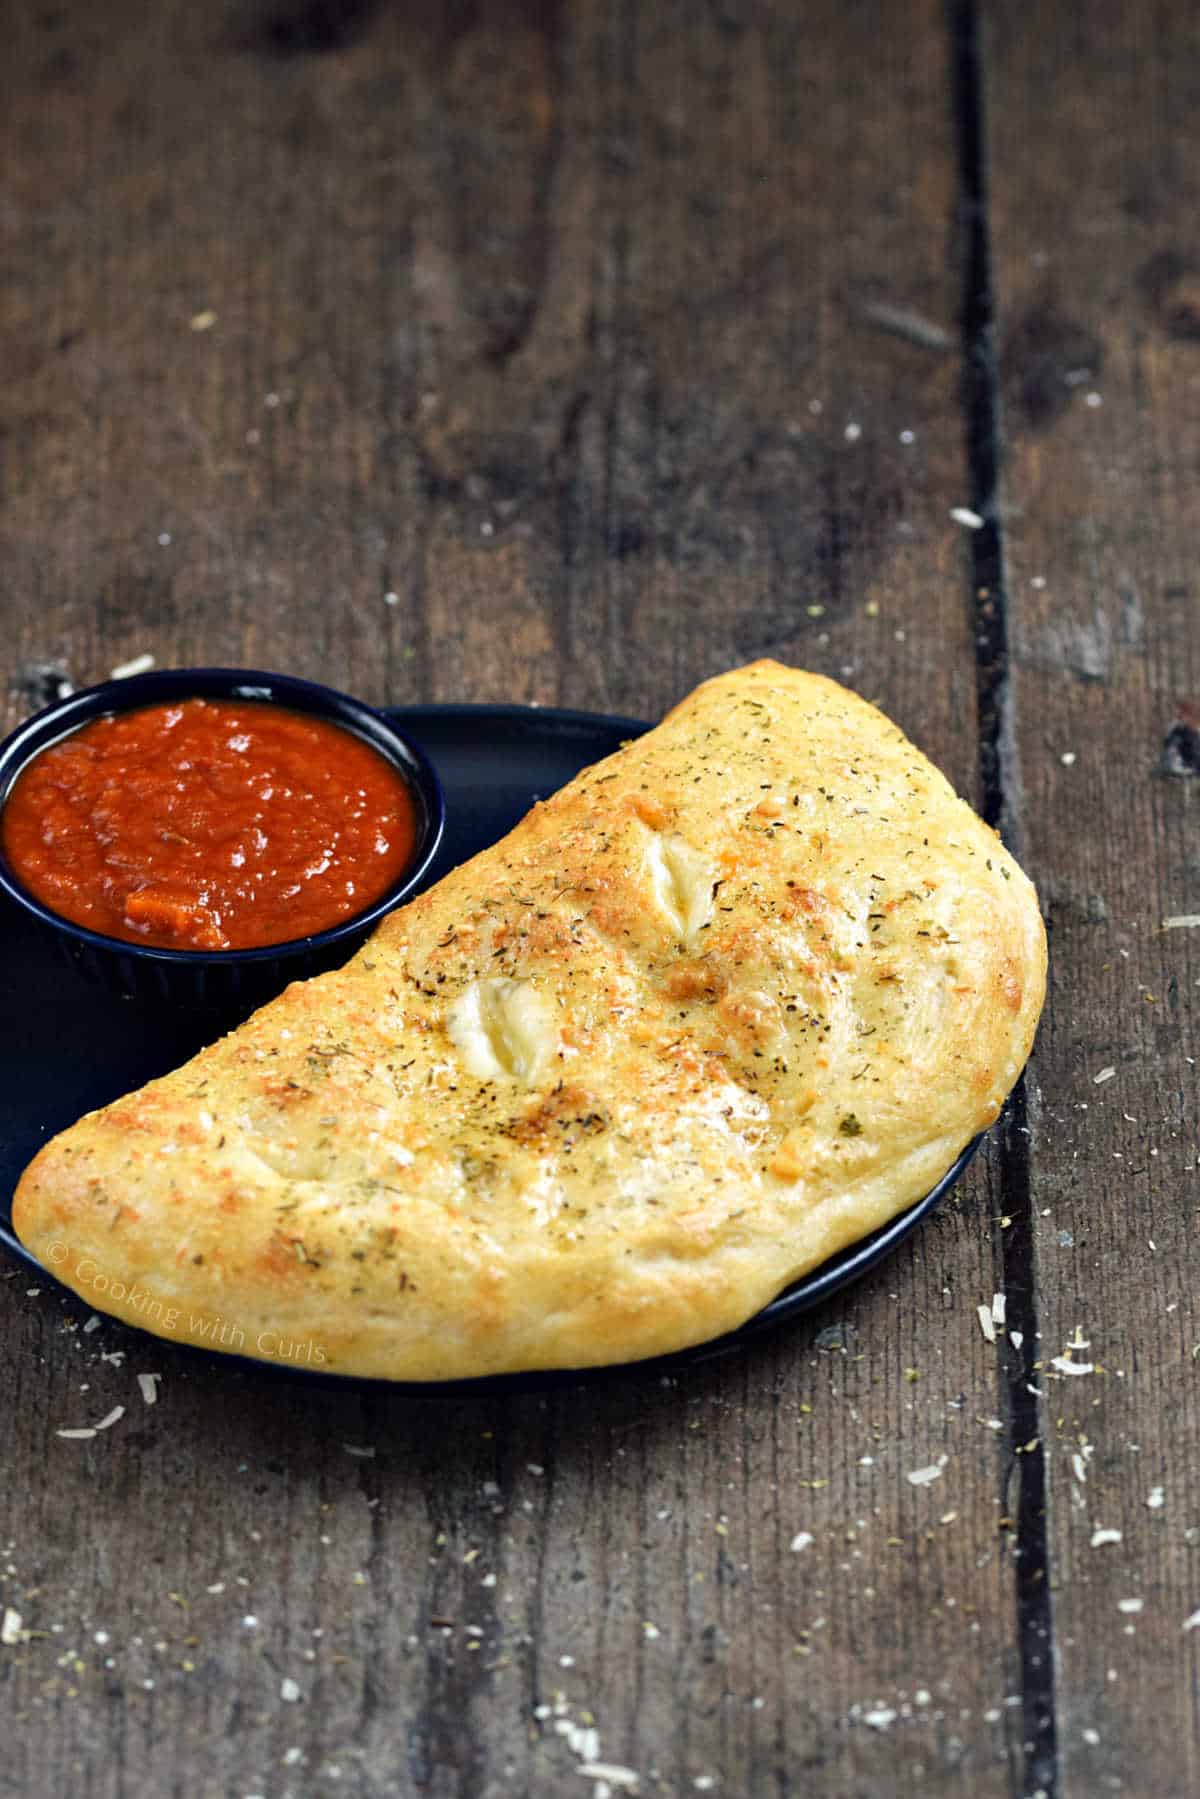 Baked calzone on a plate with small bowl of pizza sauce on the side.